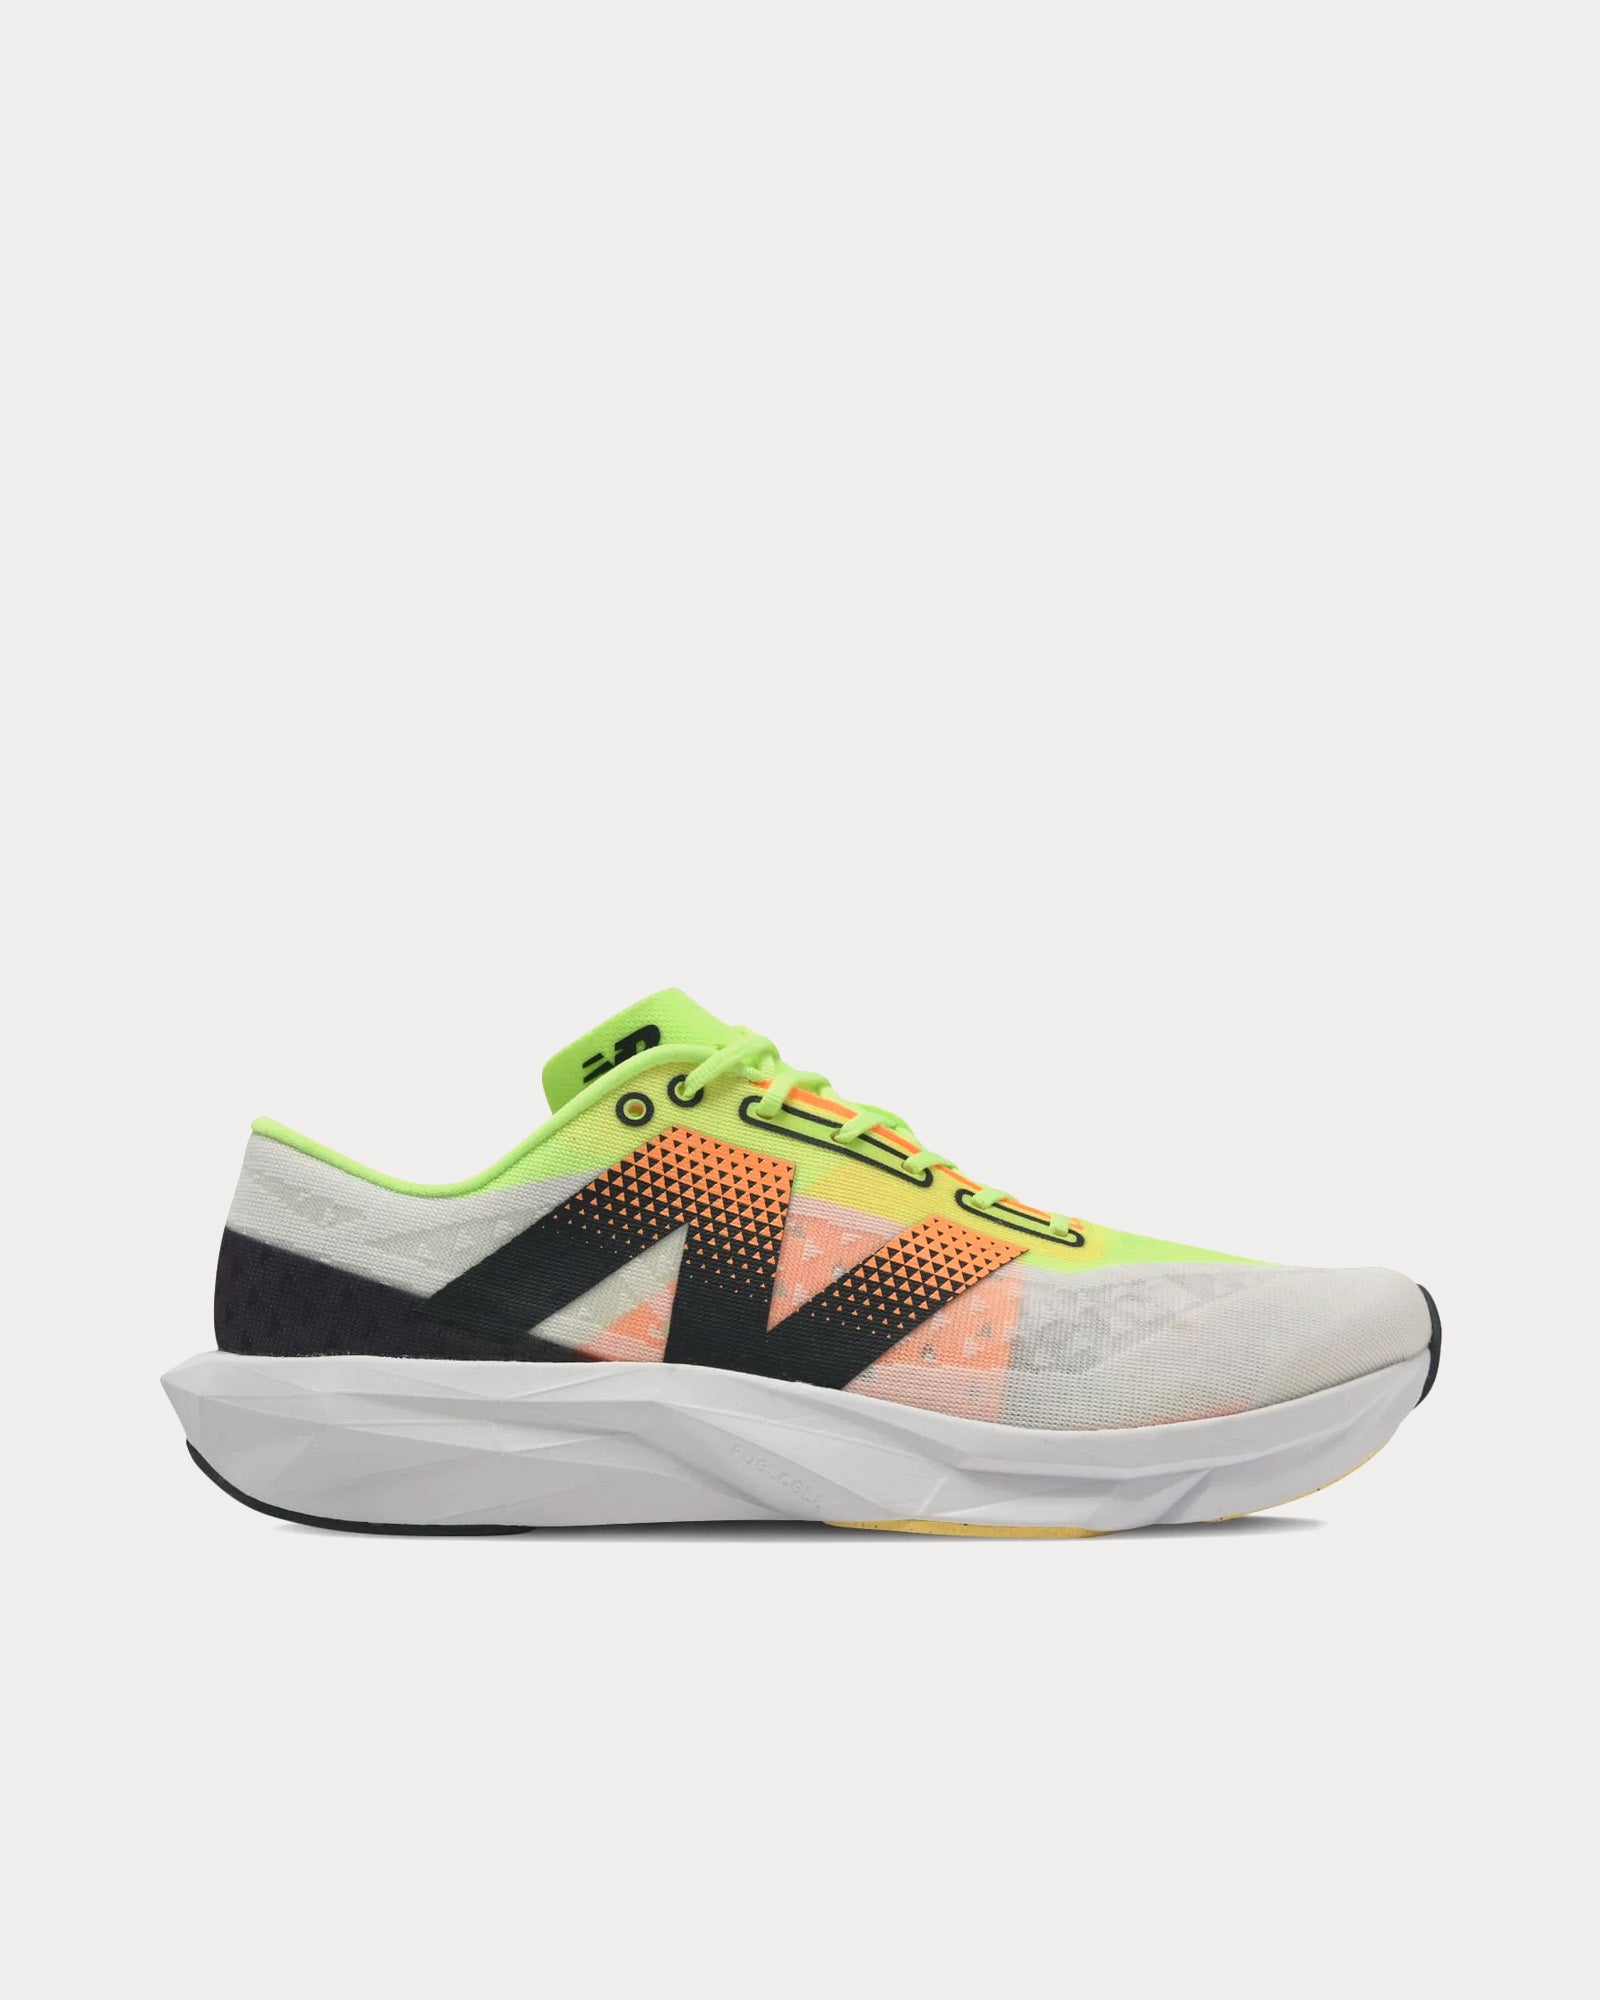 FuelCell Pvlse v1 BM White / Bleached Lime Glo / Hot Mango Running Shoes